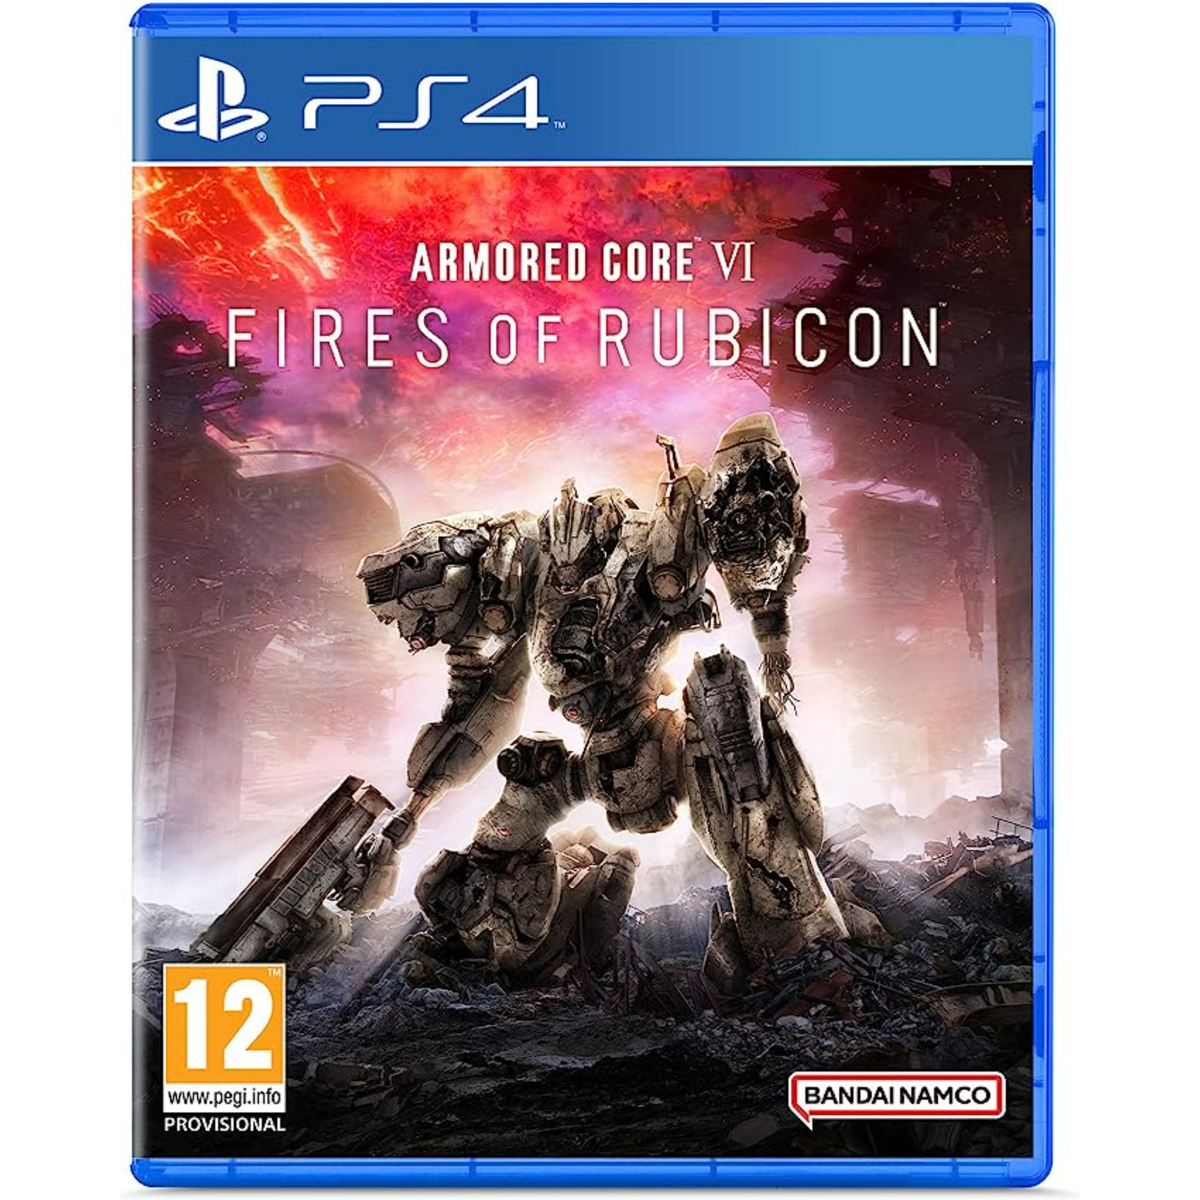 Armored Core VI Fires of Rubicon, Playstation-4